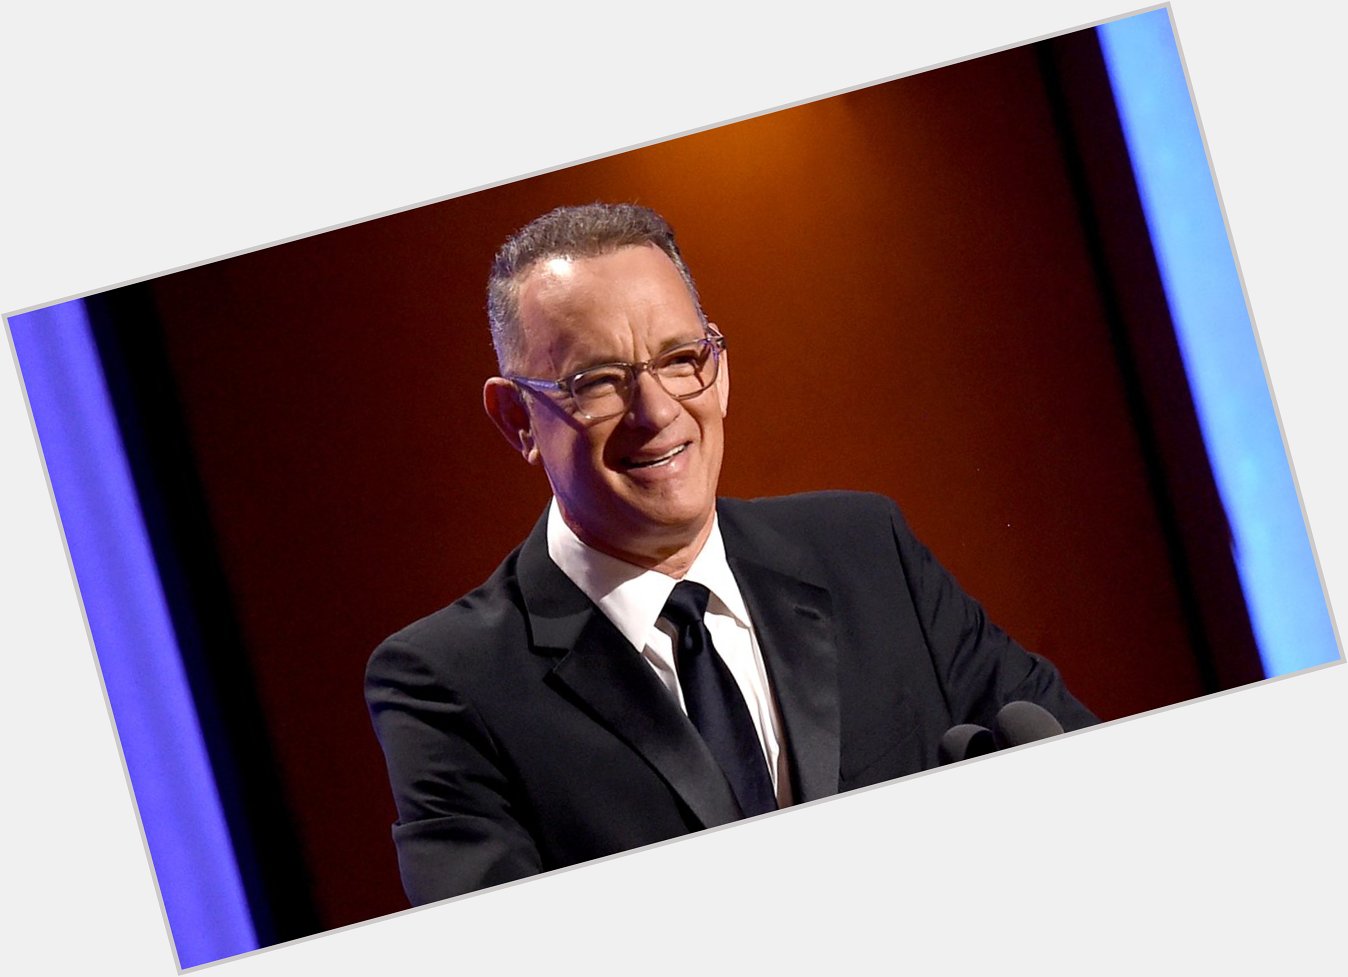 HAPPY BIRTHDAY! Actor Tom Hanks is 65 today.

What s your favorite Tom Hanks movie? 